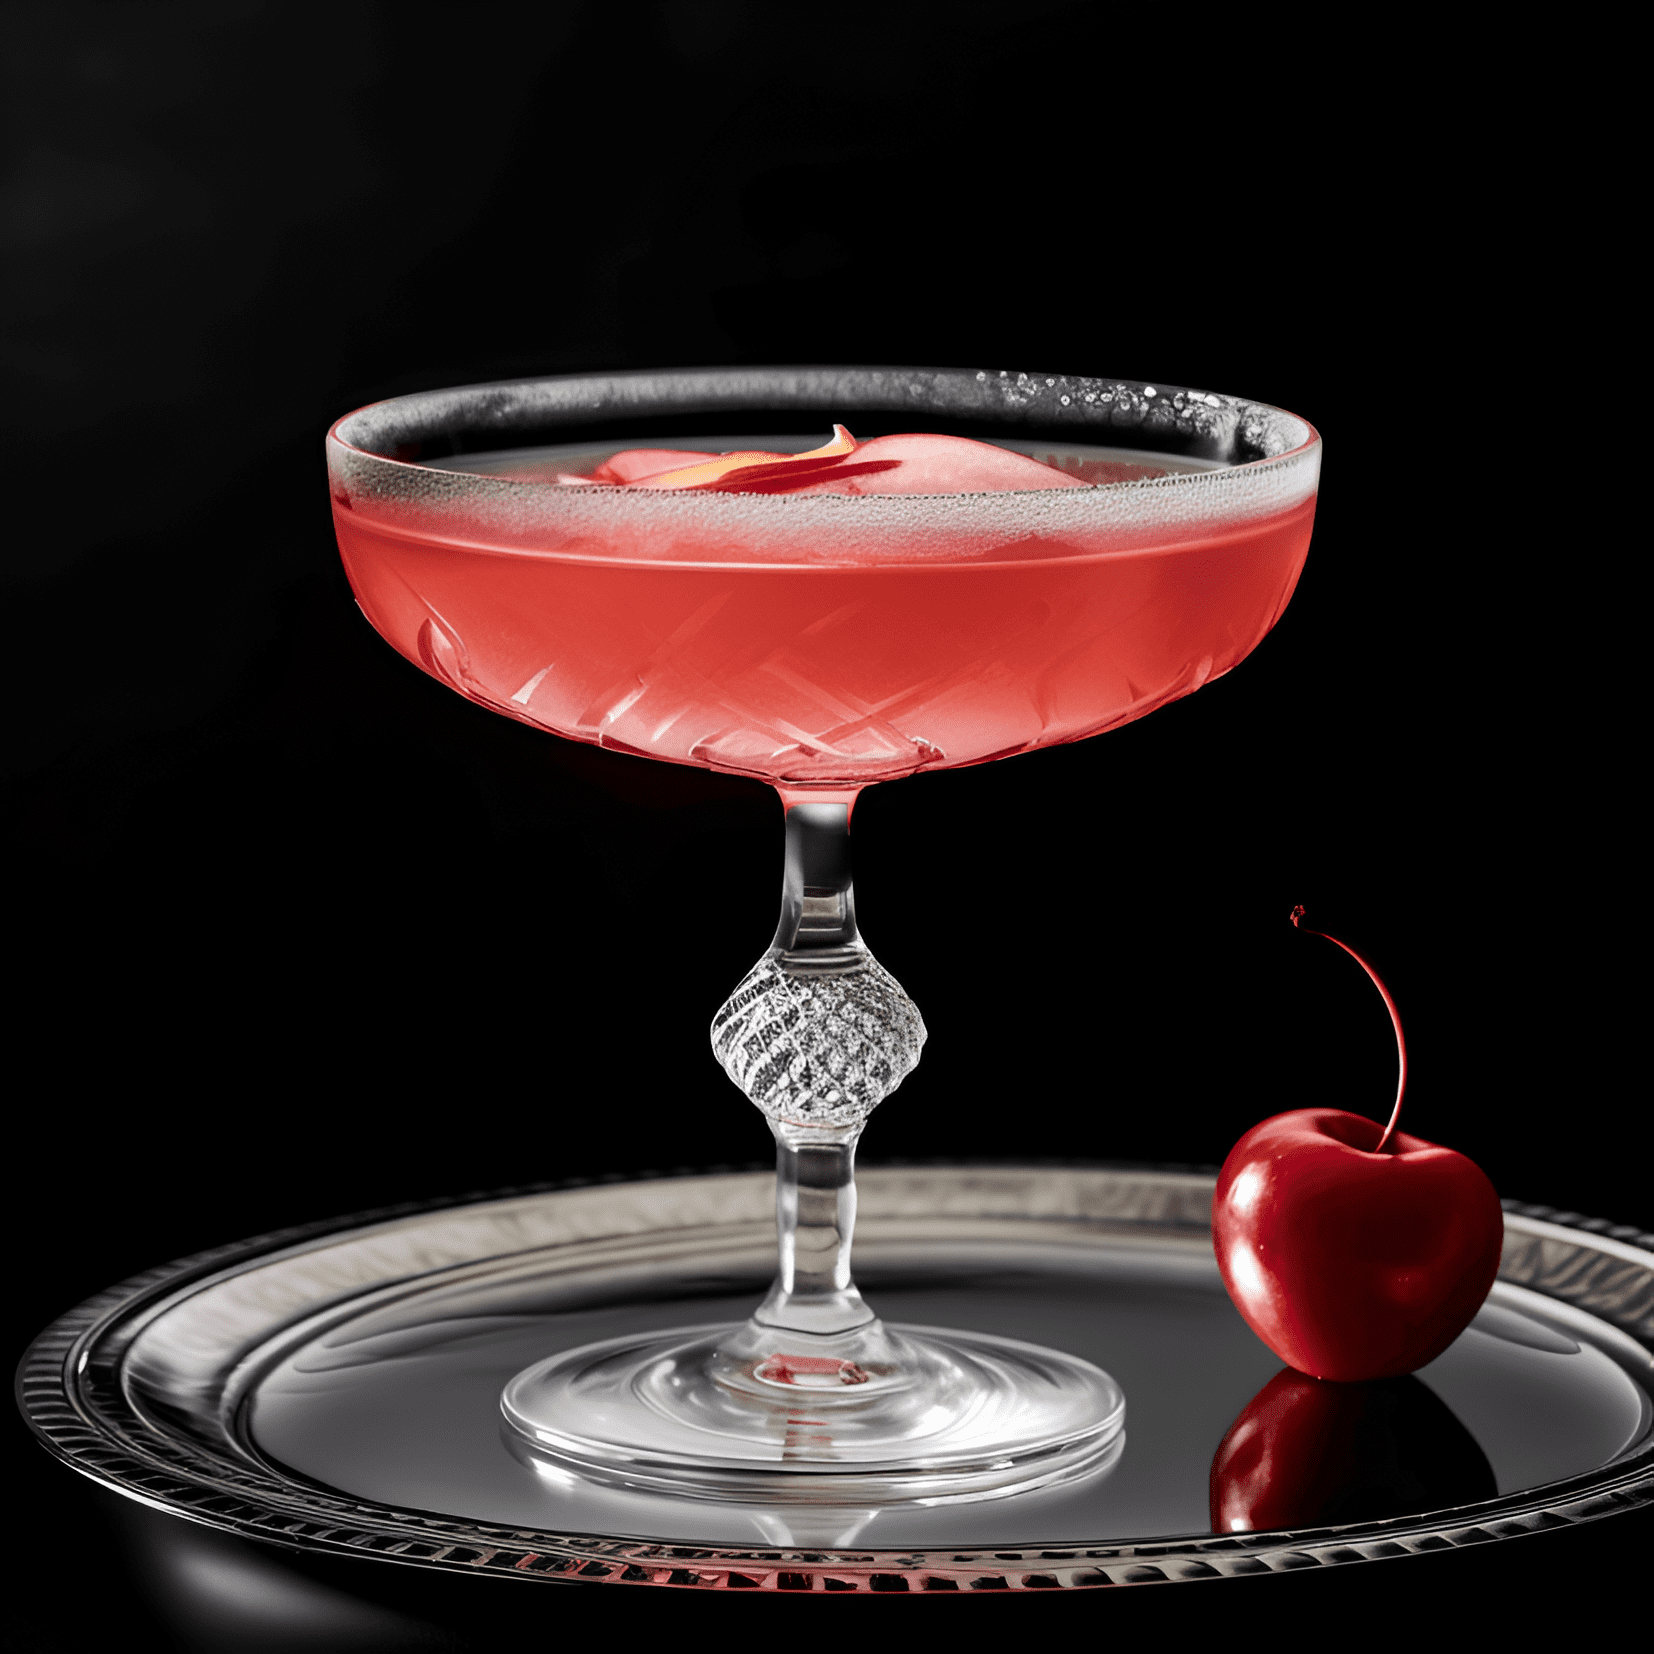 The Jack Rose cocktail is a delightful combination of sweet, sour, and fruity flavors. The apple brandy provides a rich, smooth base, while the lemon juice adds a refreshing tanginess. The grenadine imparts a subtle sweetness and a beautiful rosy hue.